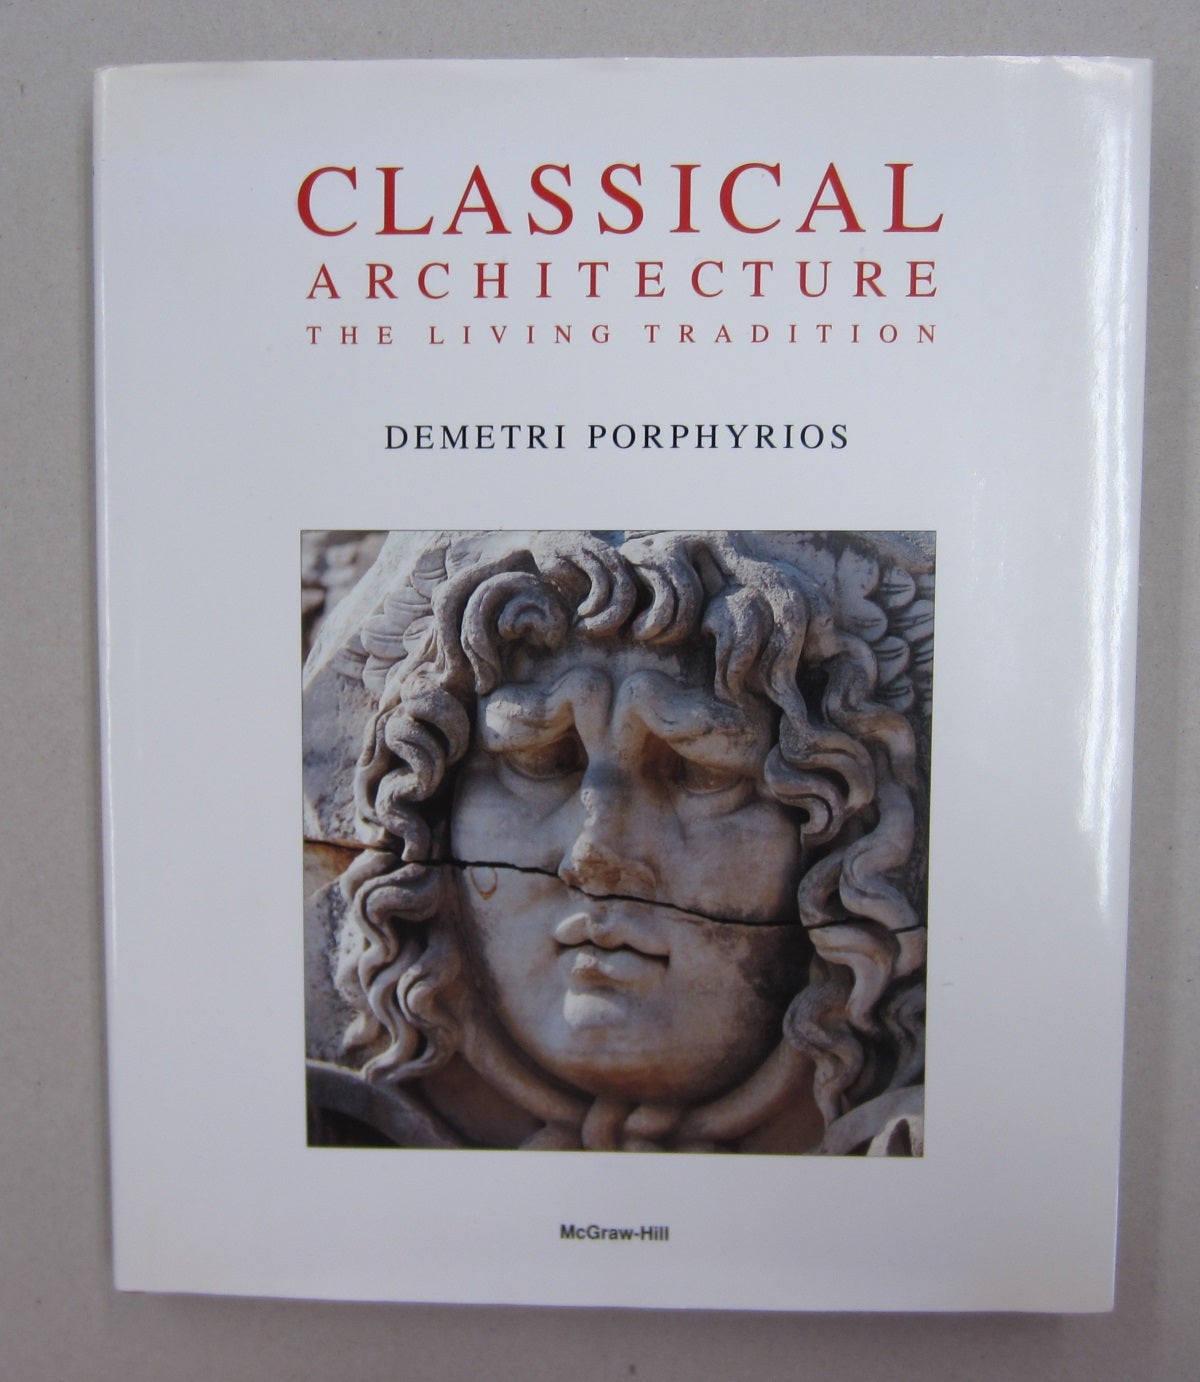 Classical Architecture: The Living Tradition by Demetri Porphyrios on  Midway Book Store